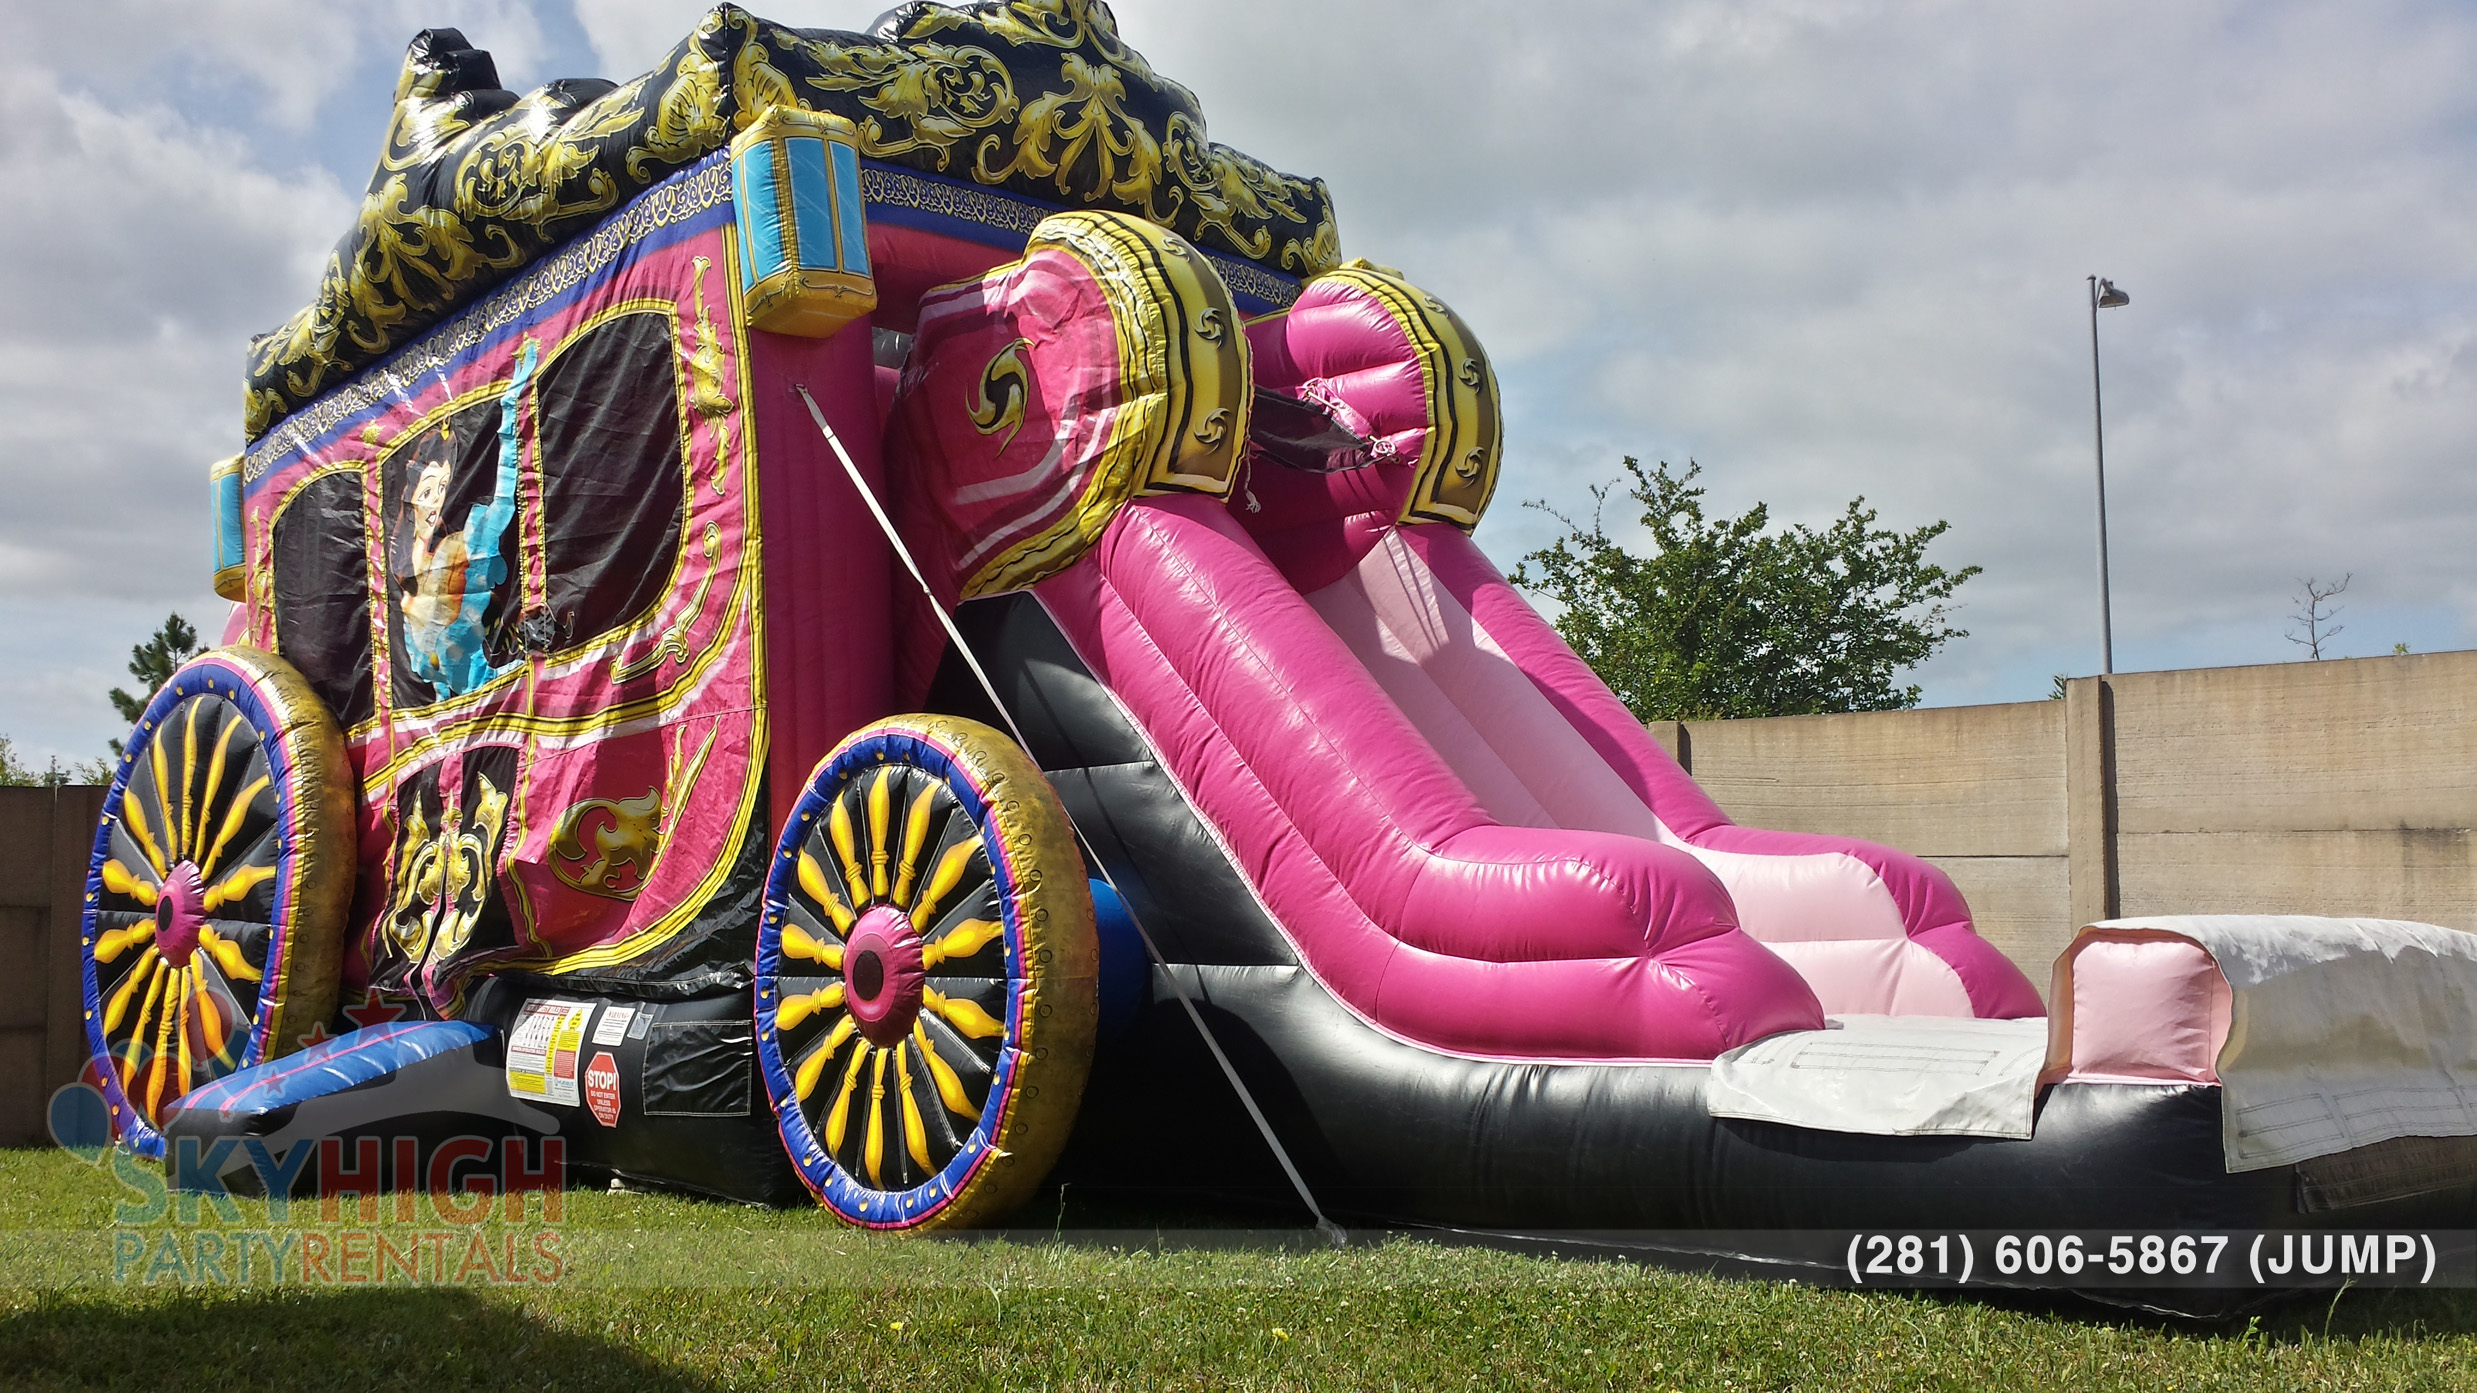 Princess Carriage Bounce House Party rentals in Houston, Texas & surrounding neighborhoods